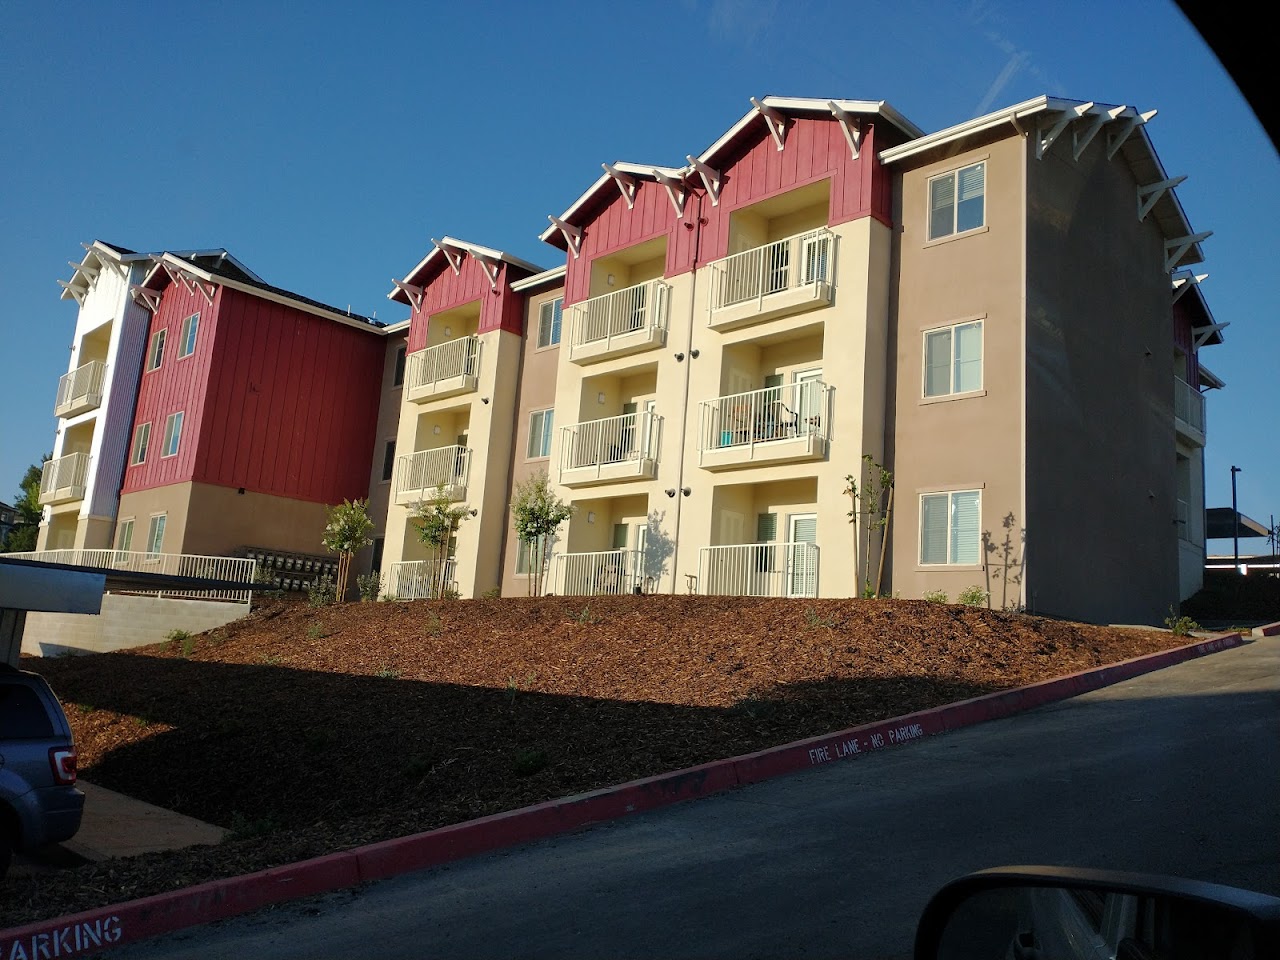 Photo of SIERRA HEIGHTS APARTMENTS. Affordable housing located at 300 HILLVIEW RIDGE LANE OROVILLE, CA 95966